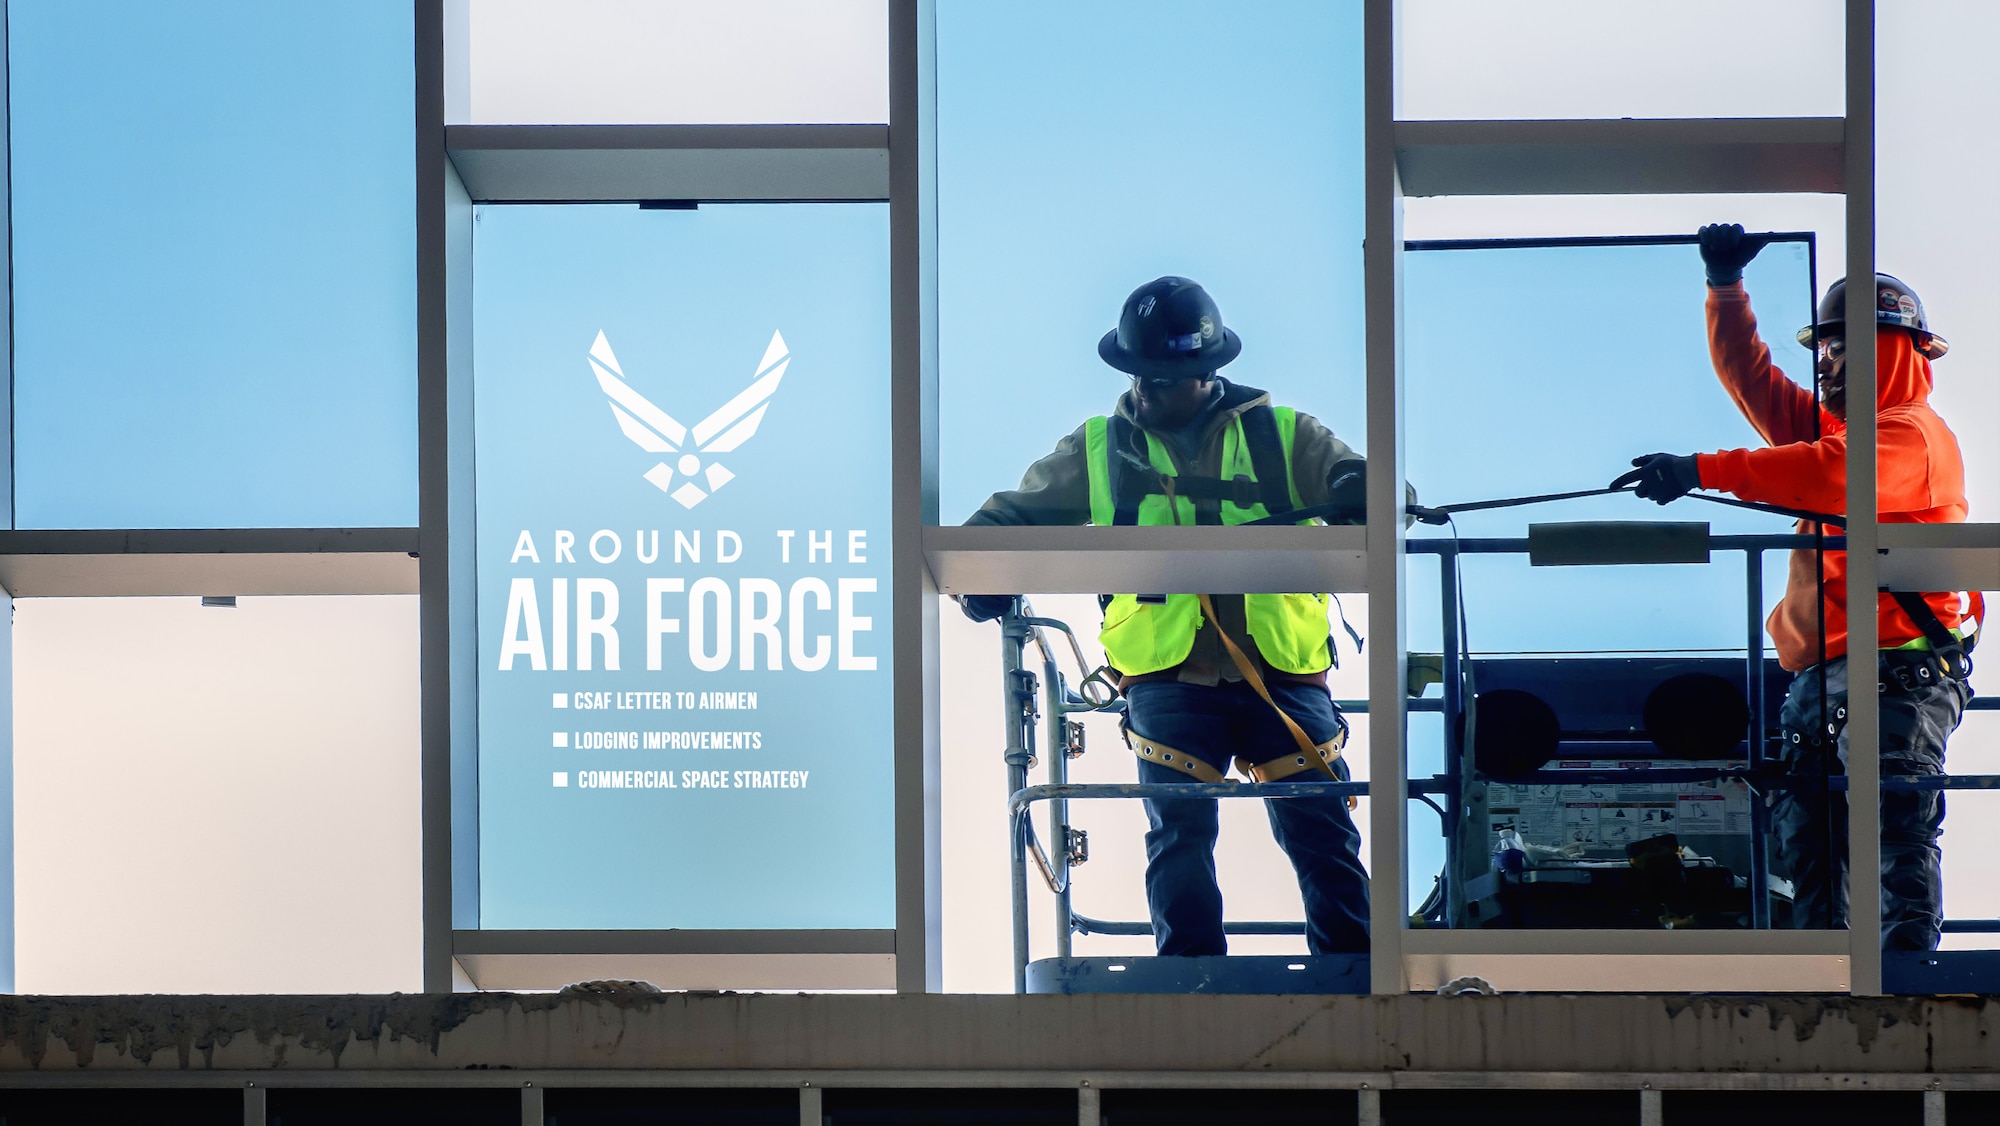   Around the Air Force: CSAF Letter to Airmen, Lodging Improvements, Commercial Space Strategy